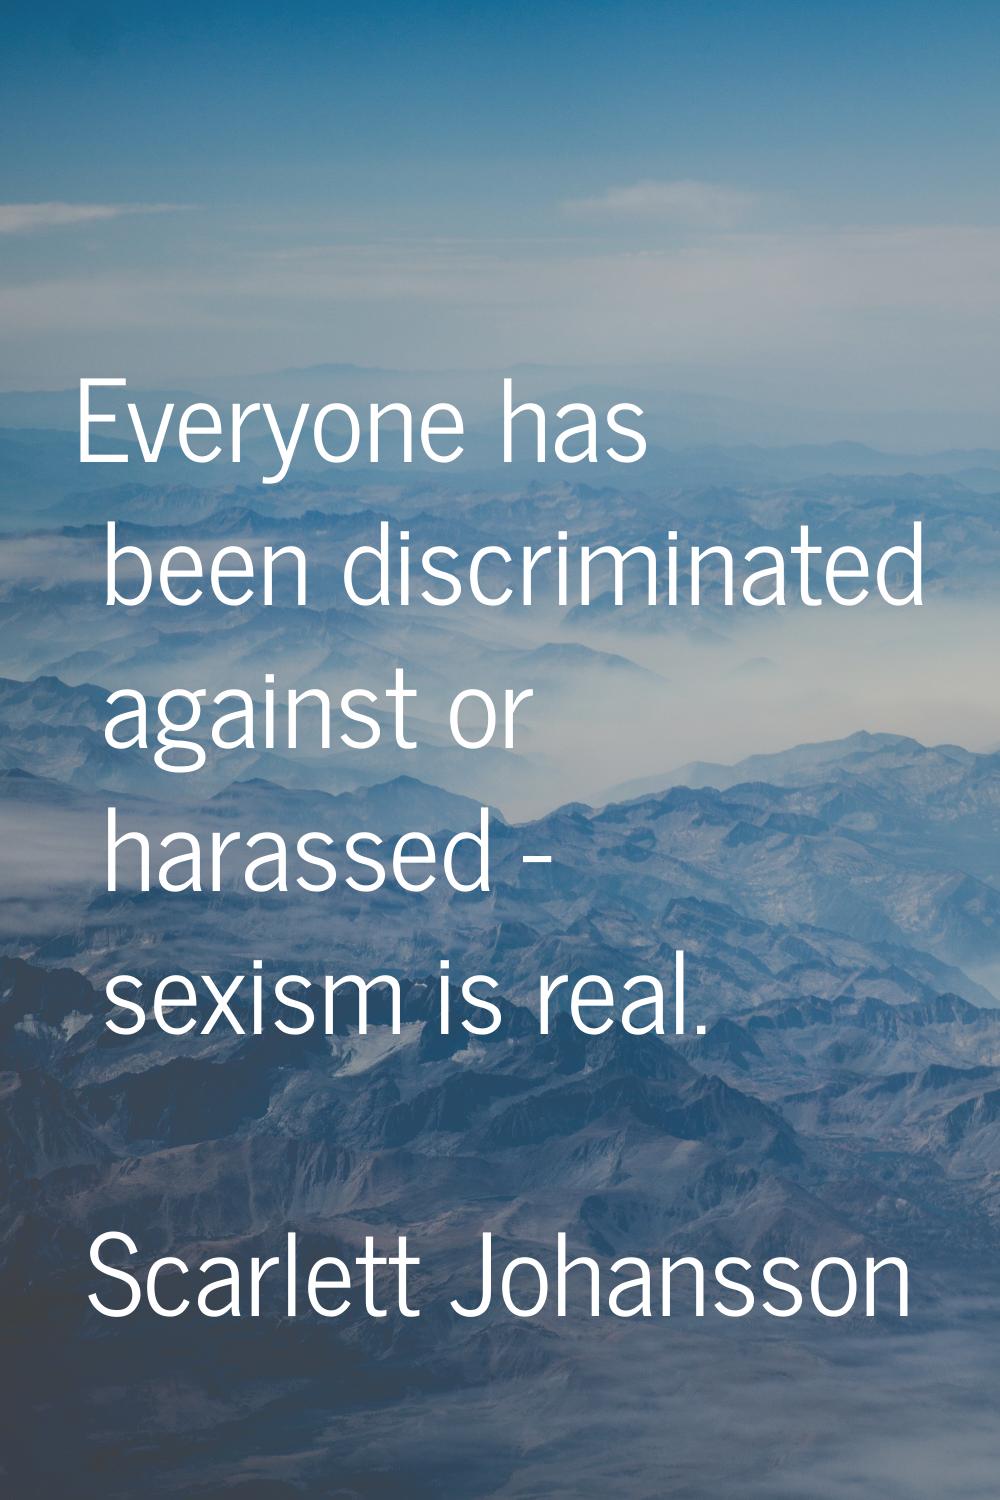 Everyone has been discriminated against or harassed - sexism is real.